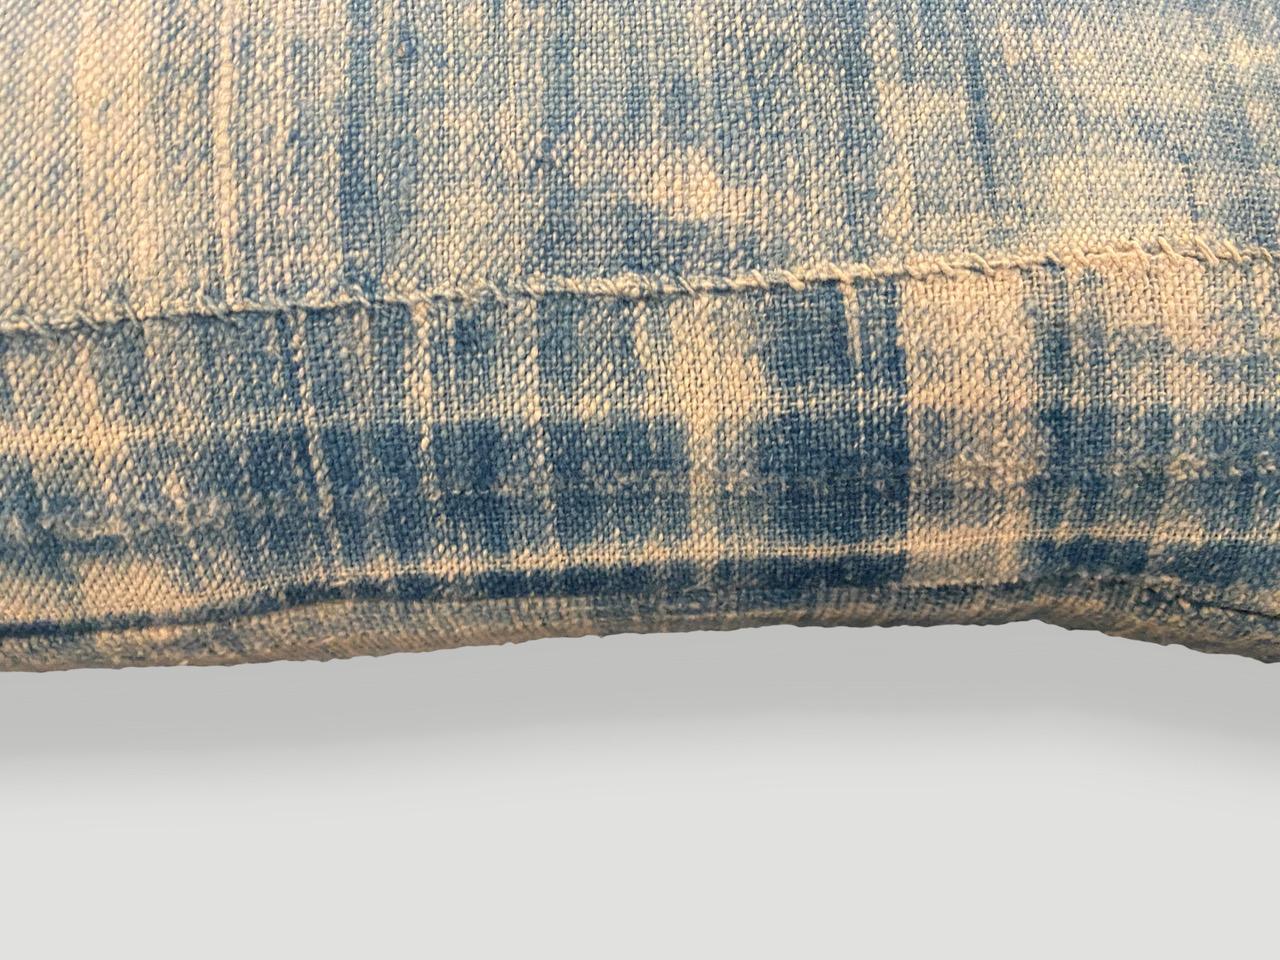 Beautiful 19th century indigo textiles from Africa, made into fabulous pillows. Antique textile on both sides with concealed zipper and insert included.

Andrianna Shamaris. The Leader In Modern Organic Design.